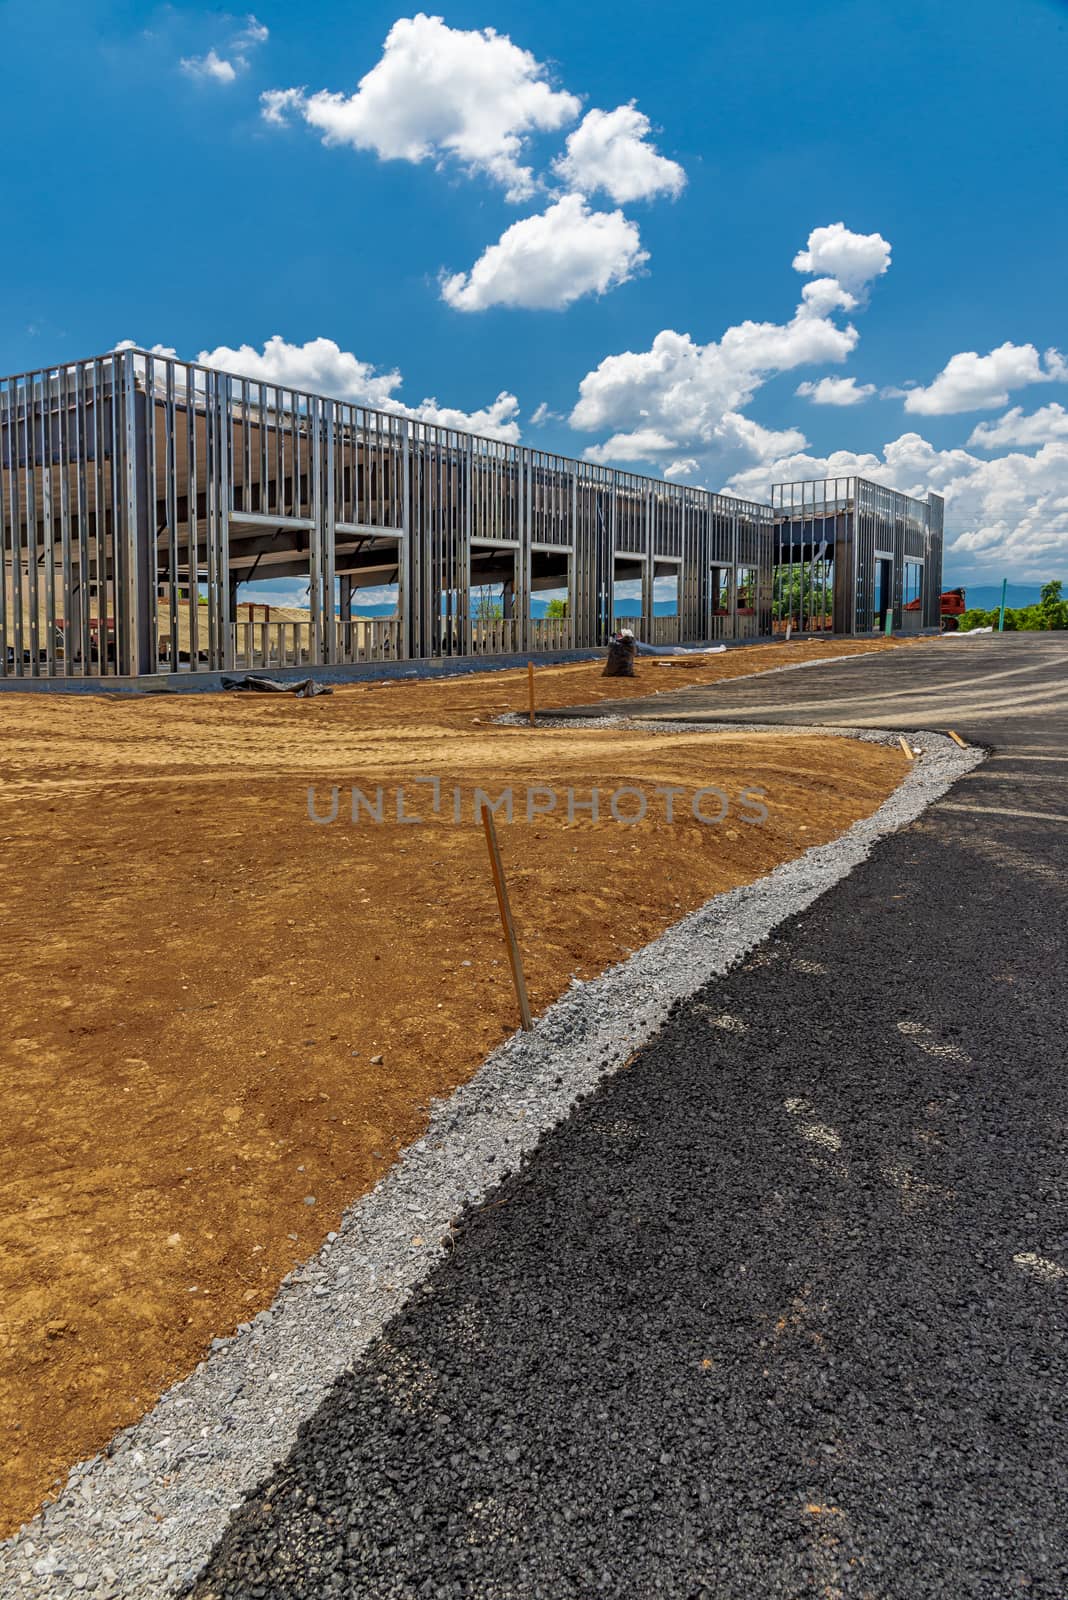 New Commercial Structure Under Construction by stockbuster1